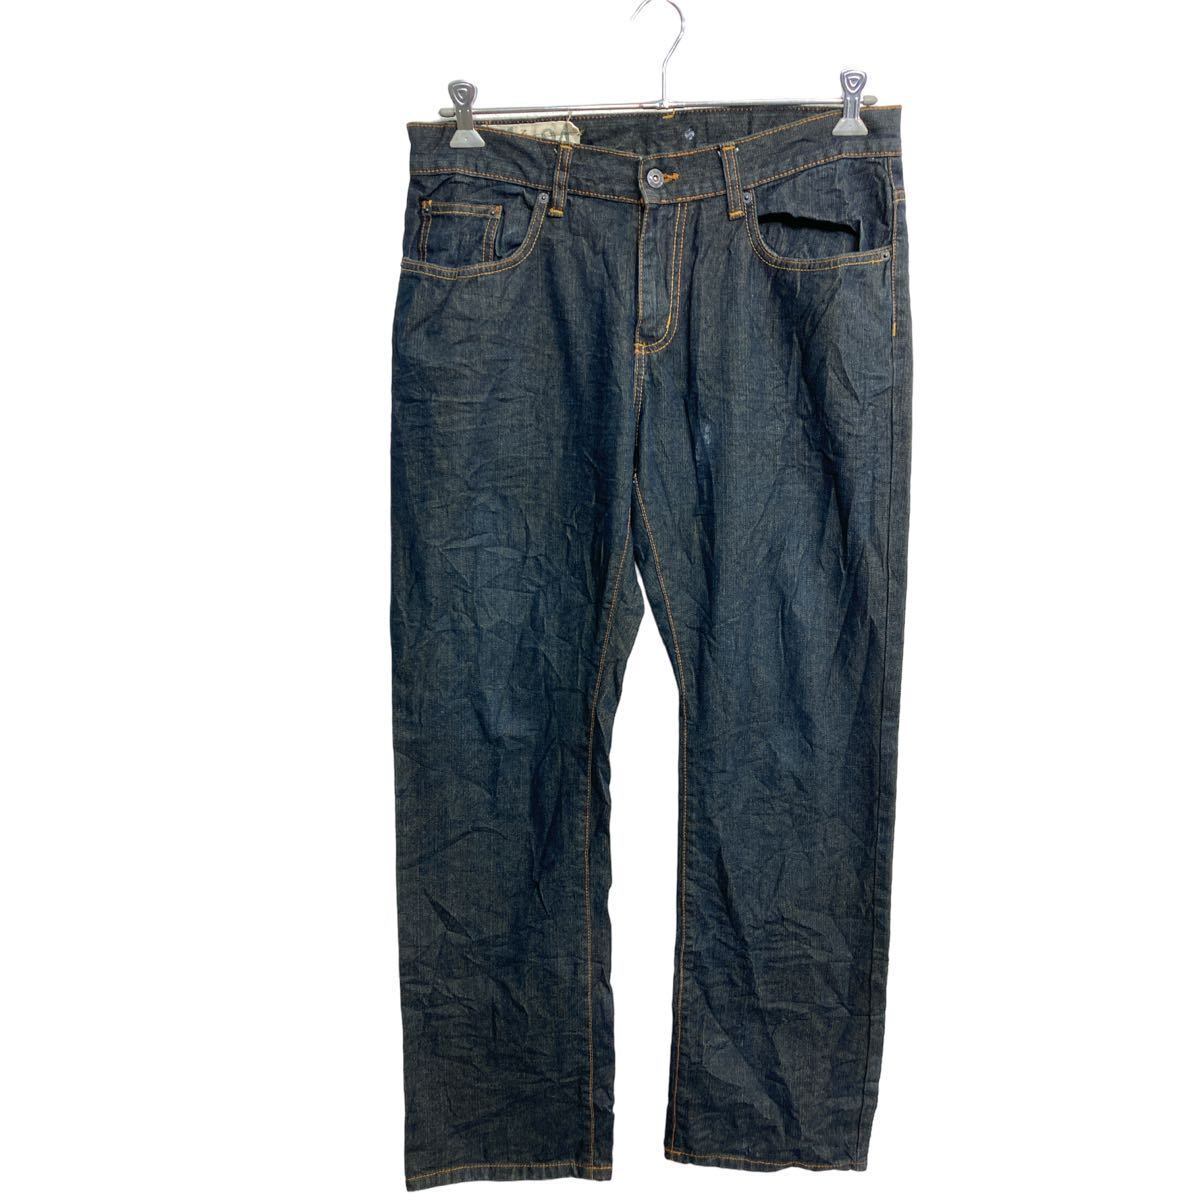 【GUESS】デニムジーンズ 1981skinny MADE IN USA新品